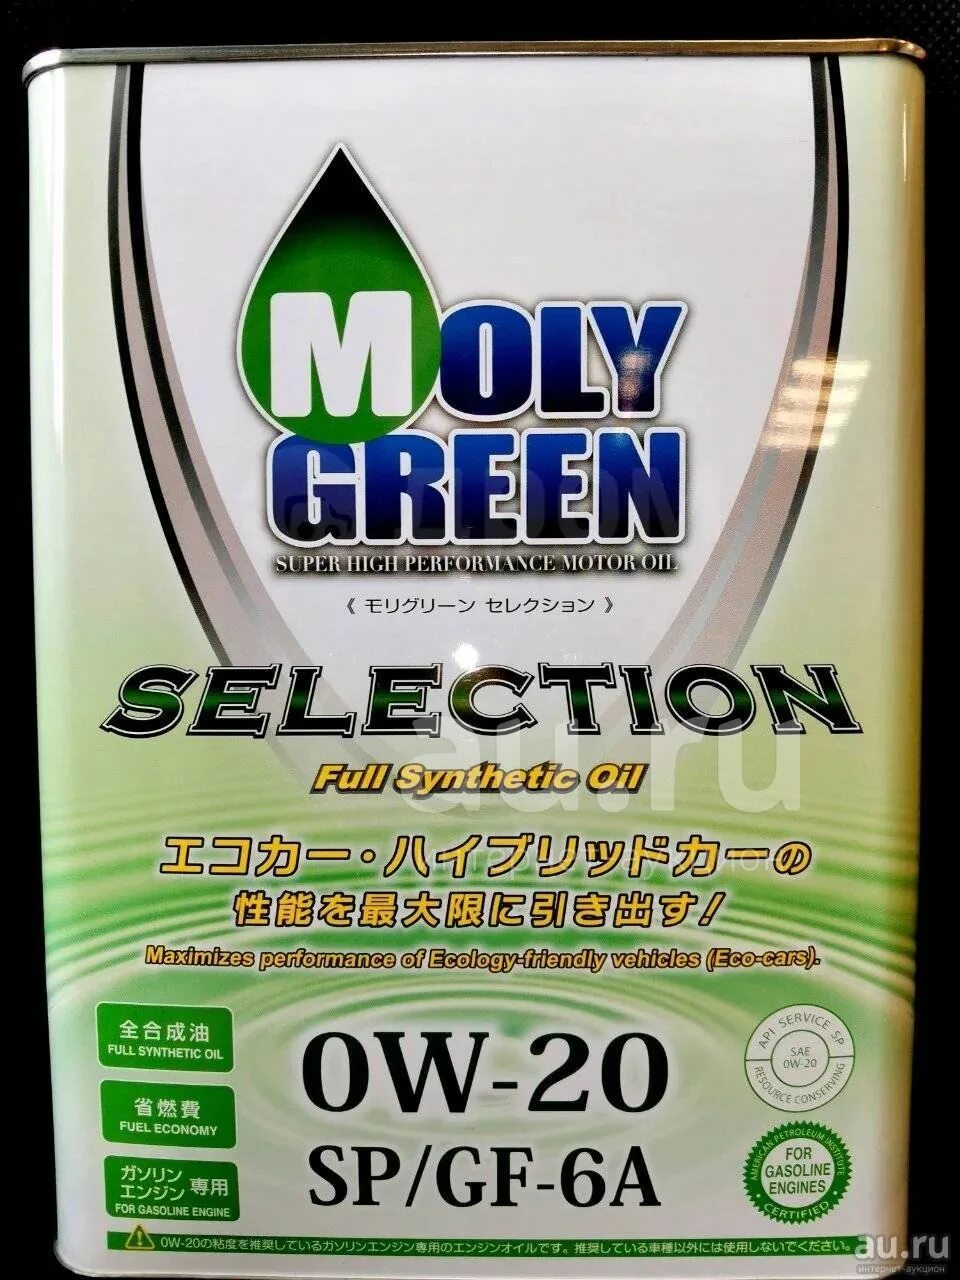 0w20 sp gf 6a. Moly Green selection 0w20 SP/gf-6a. Масло моторное Moly Green 0w20 SN. Moly Green selection SP/gf-6a/CF 5w-30 4l. Масло моторное Moly Green selection SP/gf-6a 0w-20 (4,0) (6шт/кор).